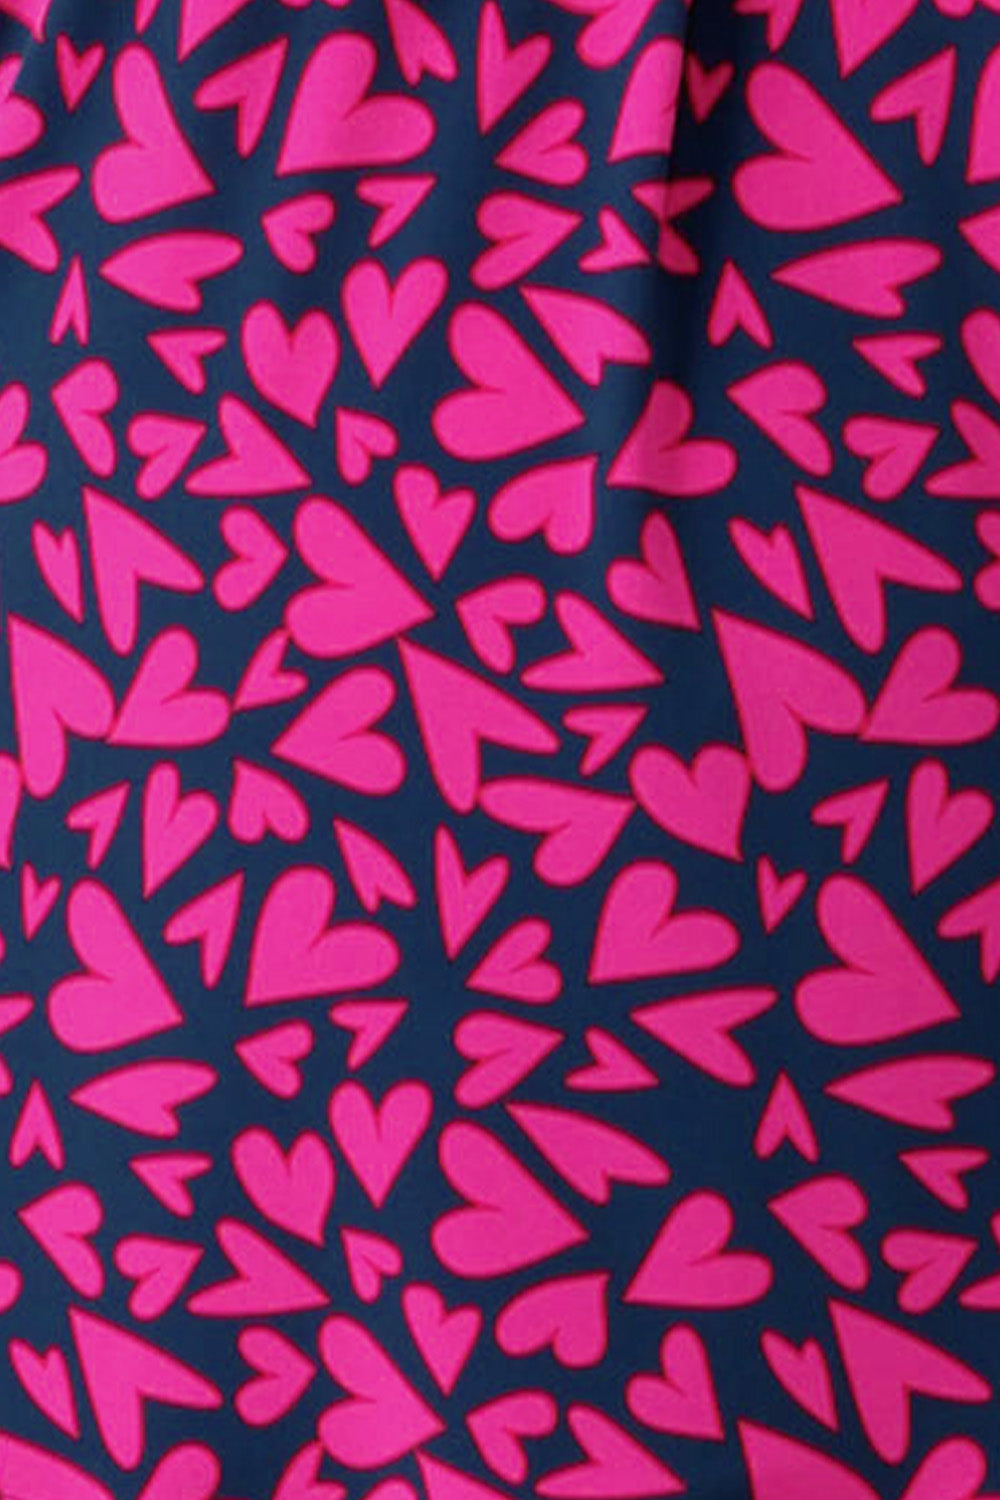 swatch of a printed jersey fabric patterned with pink hearts on a navy blue base. This fabric was designed at Leina and Fleur in Queensland, Australia and is used in their Valentine's range of woman's clothing made in Australia for petite to plus size women,